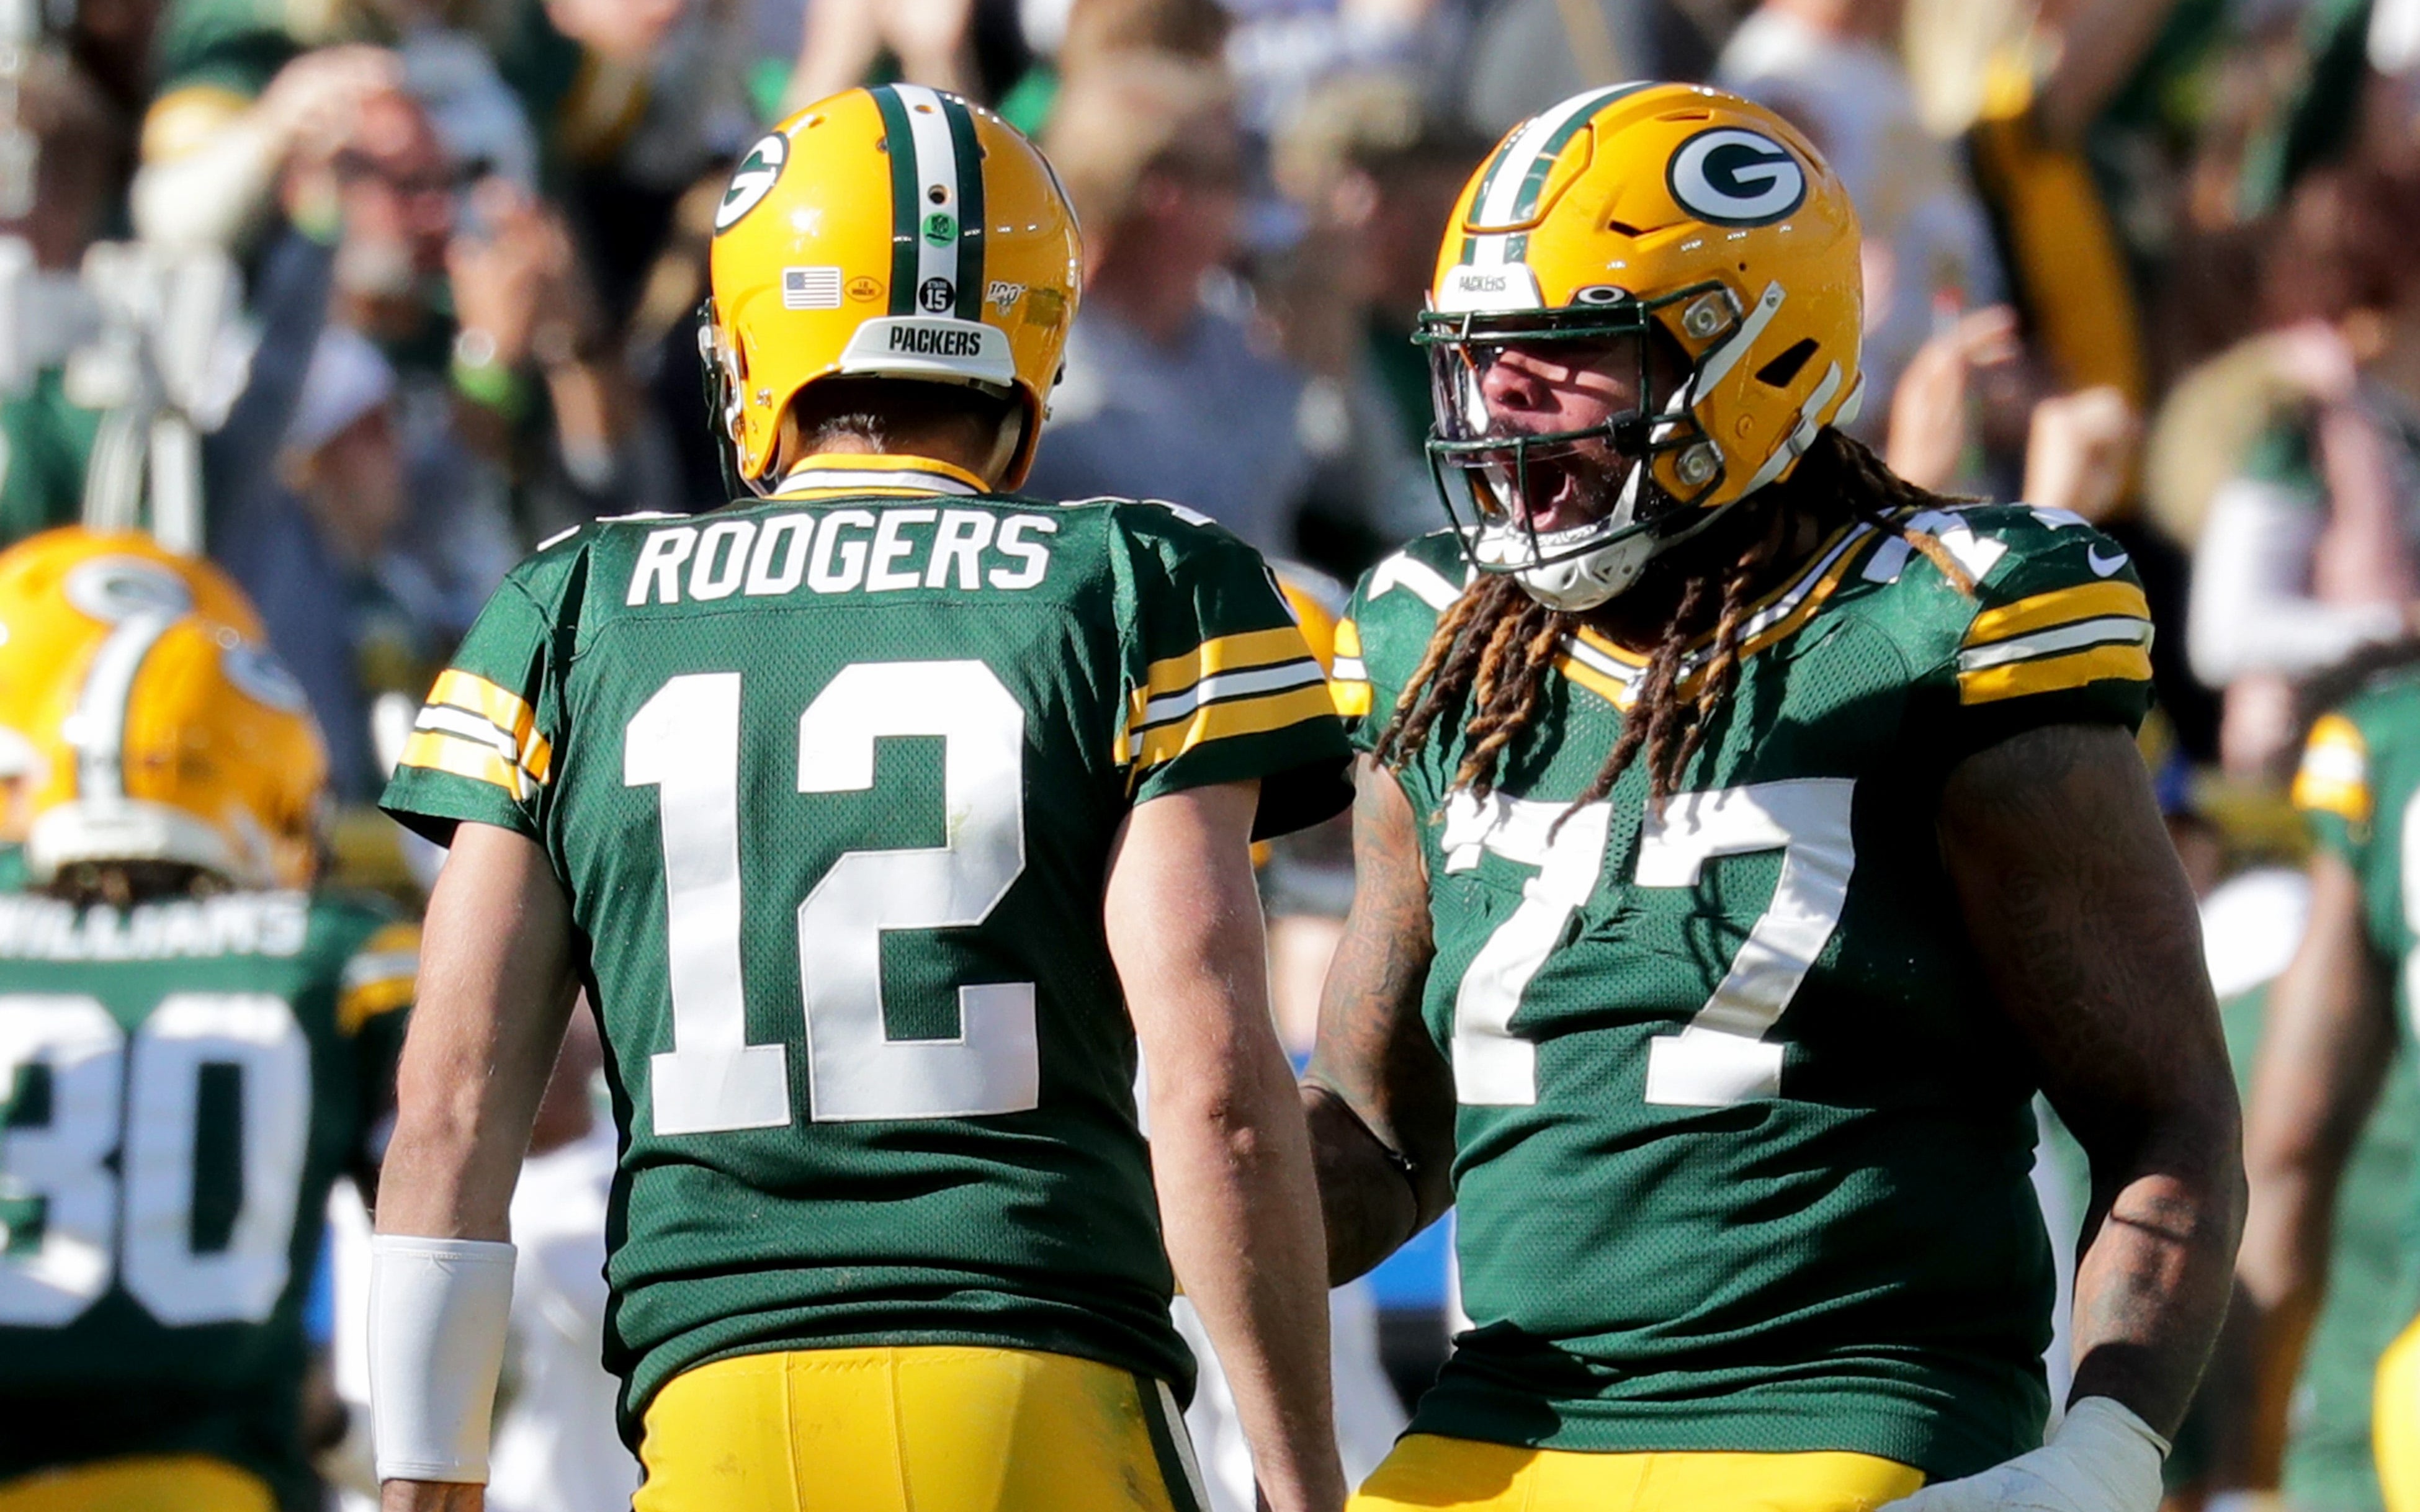 Billy turner and Aaron Rodgers. Credit: Mike De Sisti, USA TODAY Sports.